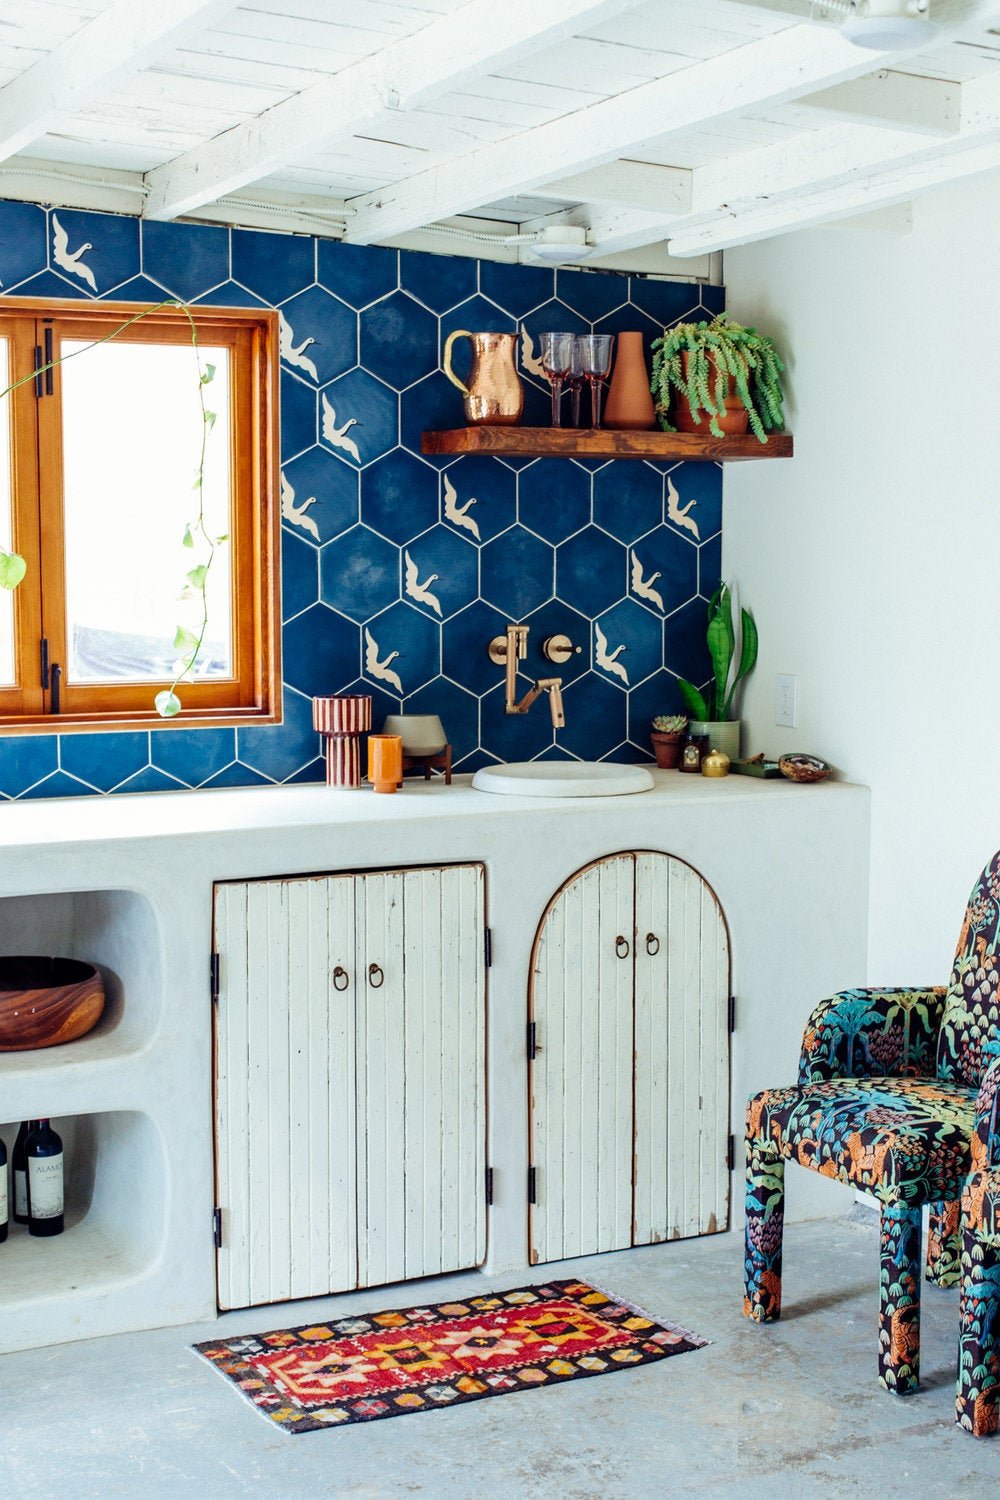 Justina Blakeney and More Share the One Decor Mistake They Always Notice